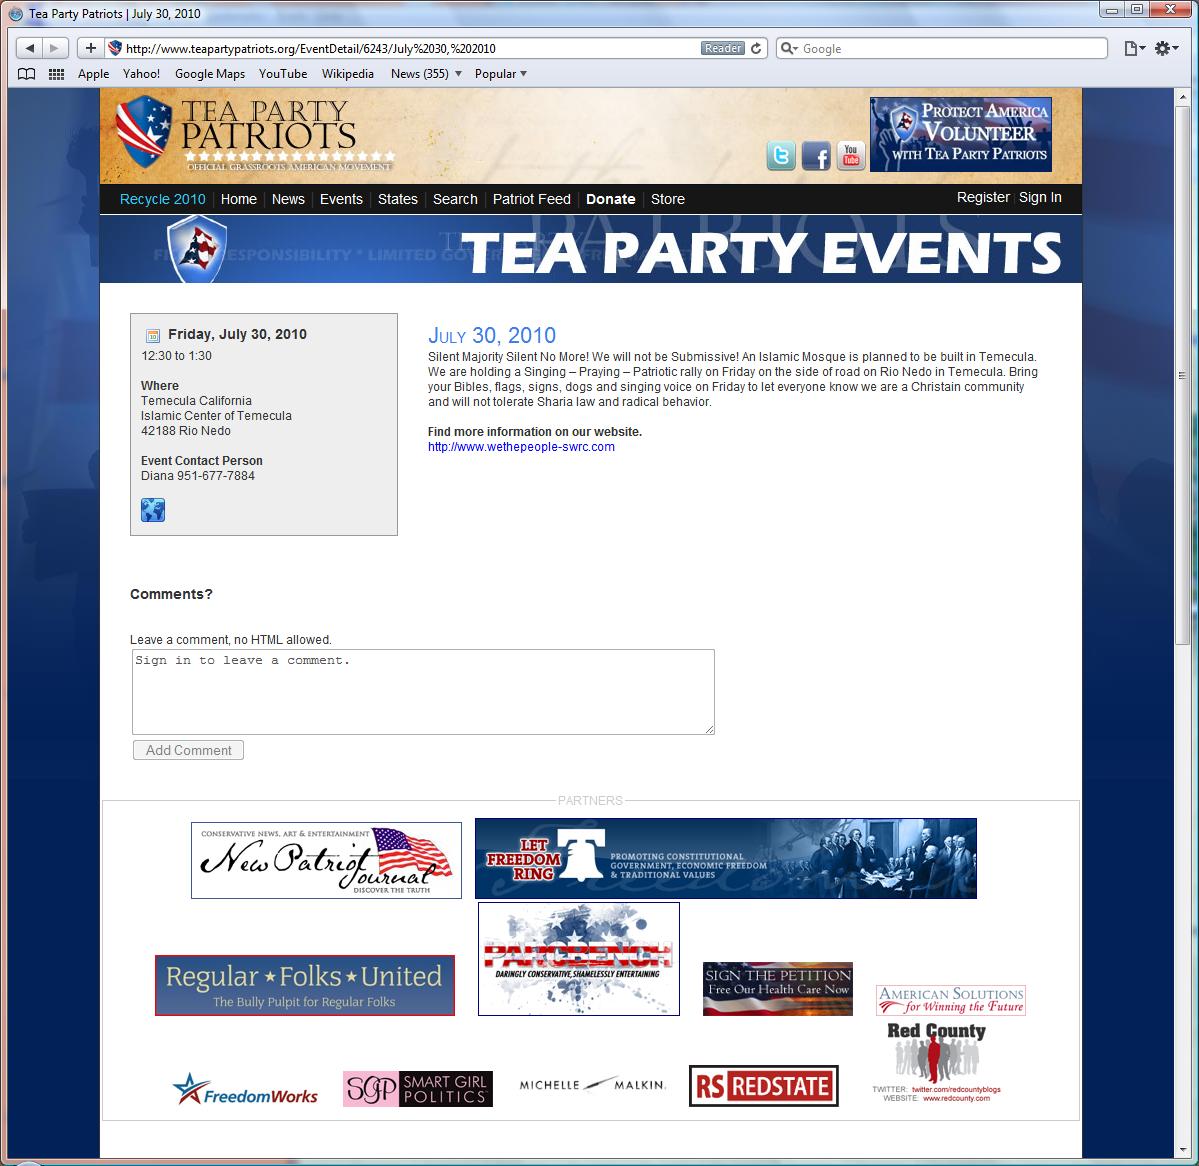 National Tea Party Patriots Web Site Promotes Southwest Riverside County (SWRC) Tea Party Citizens in Action Group Mosque "Rally"